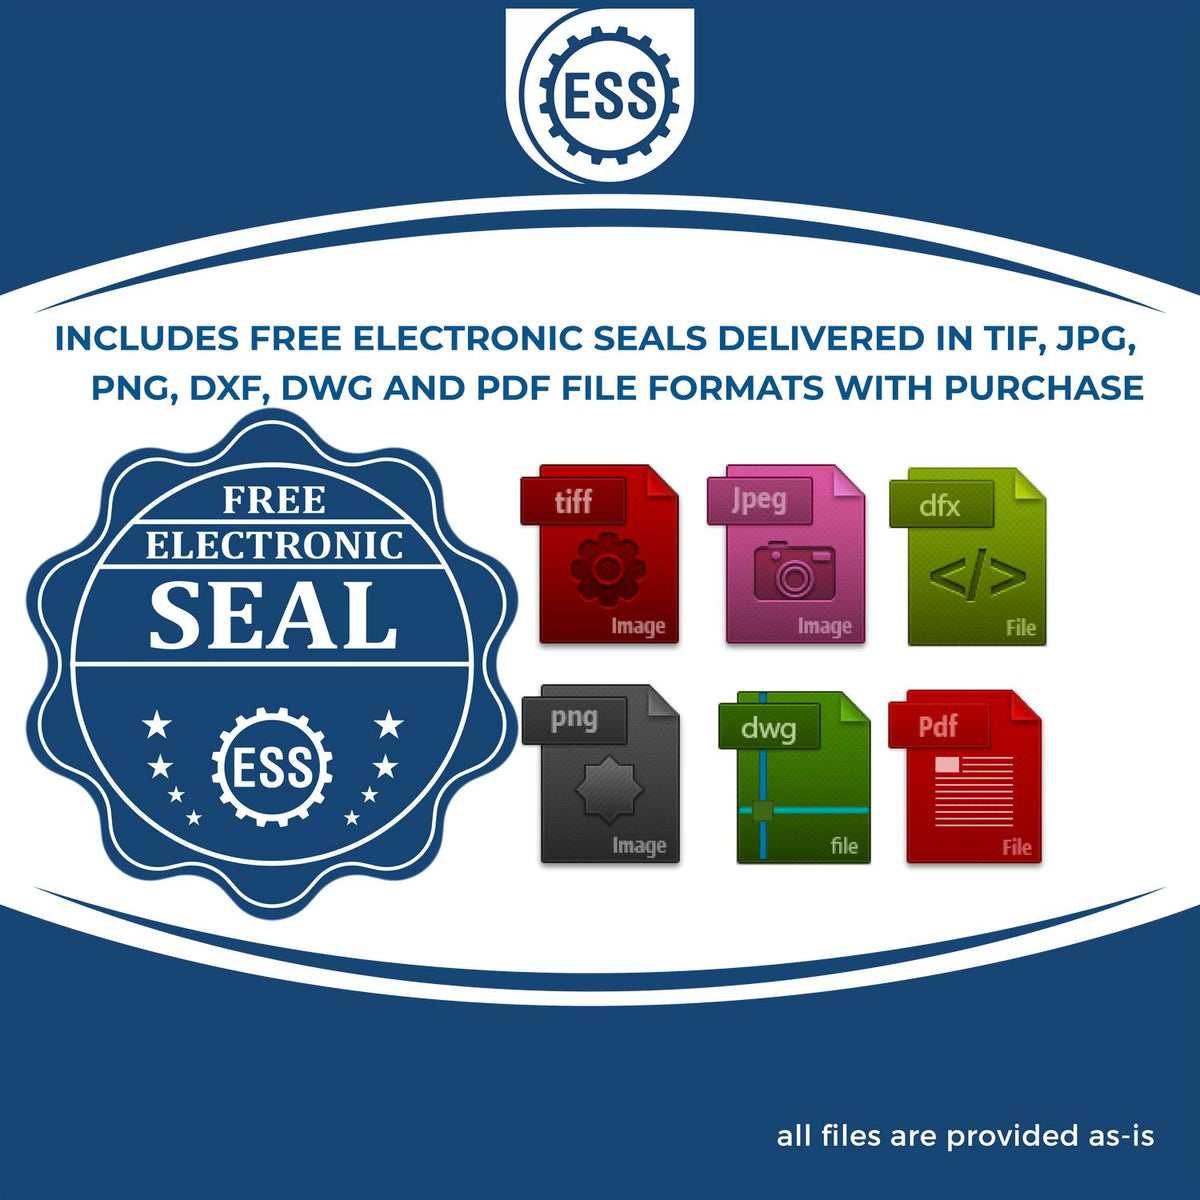 An infographic for the free electronic seal for the Kentucky Desk Surveyor Seal Embosser illustrating the different file type icons such as DXF, DWG, TIF, JPG and PNG.